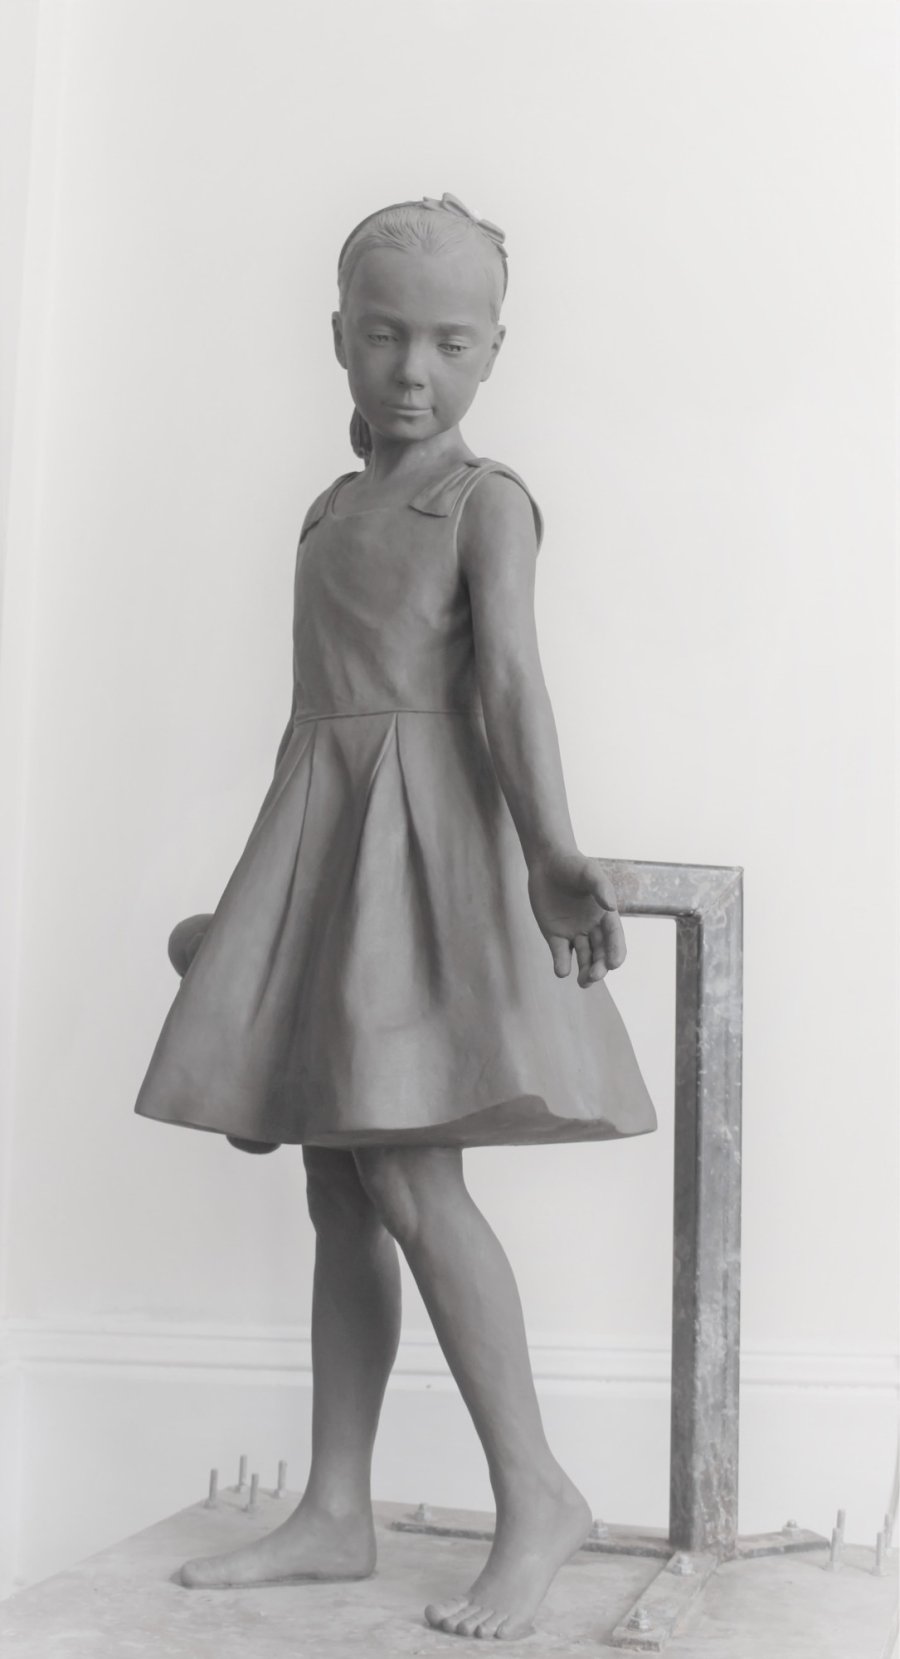 Life size clay sculpture of a young girl